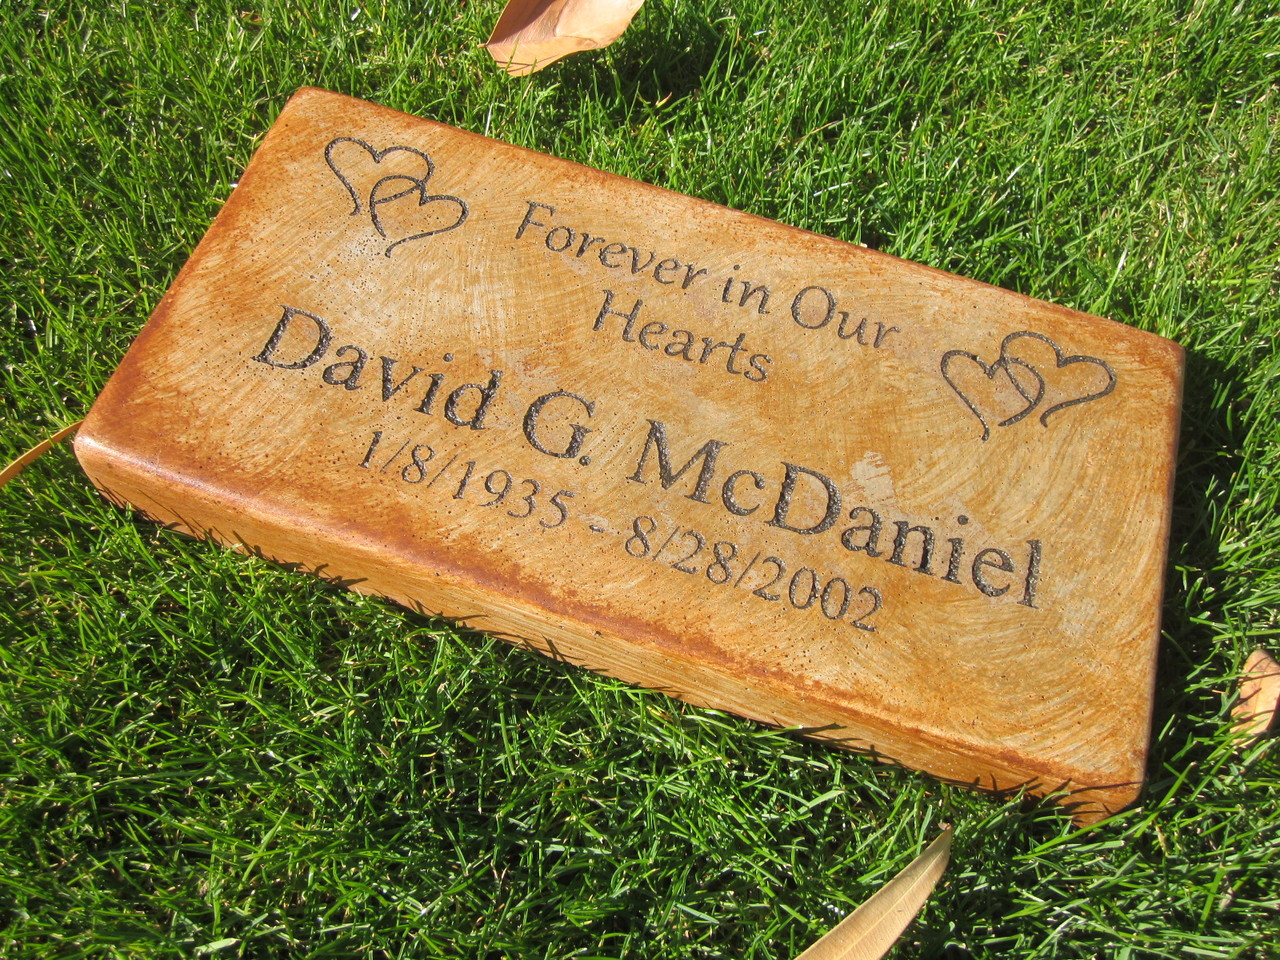 Personalized Engraved Memorial Stone 11.5"x 5.5" Forever in Our Hearts Memories to Stone